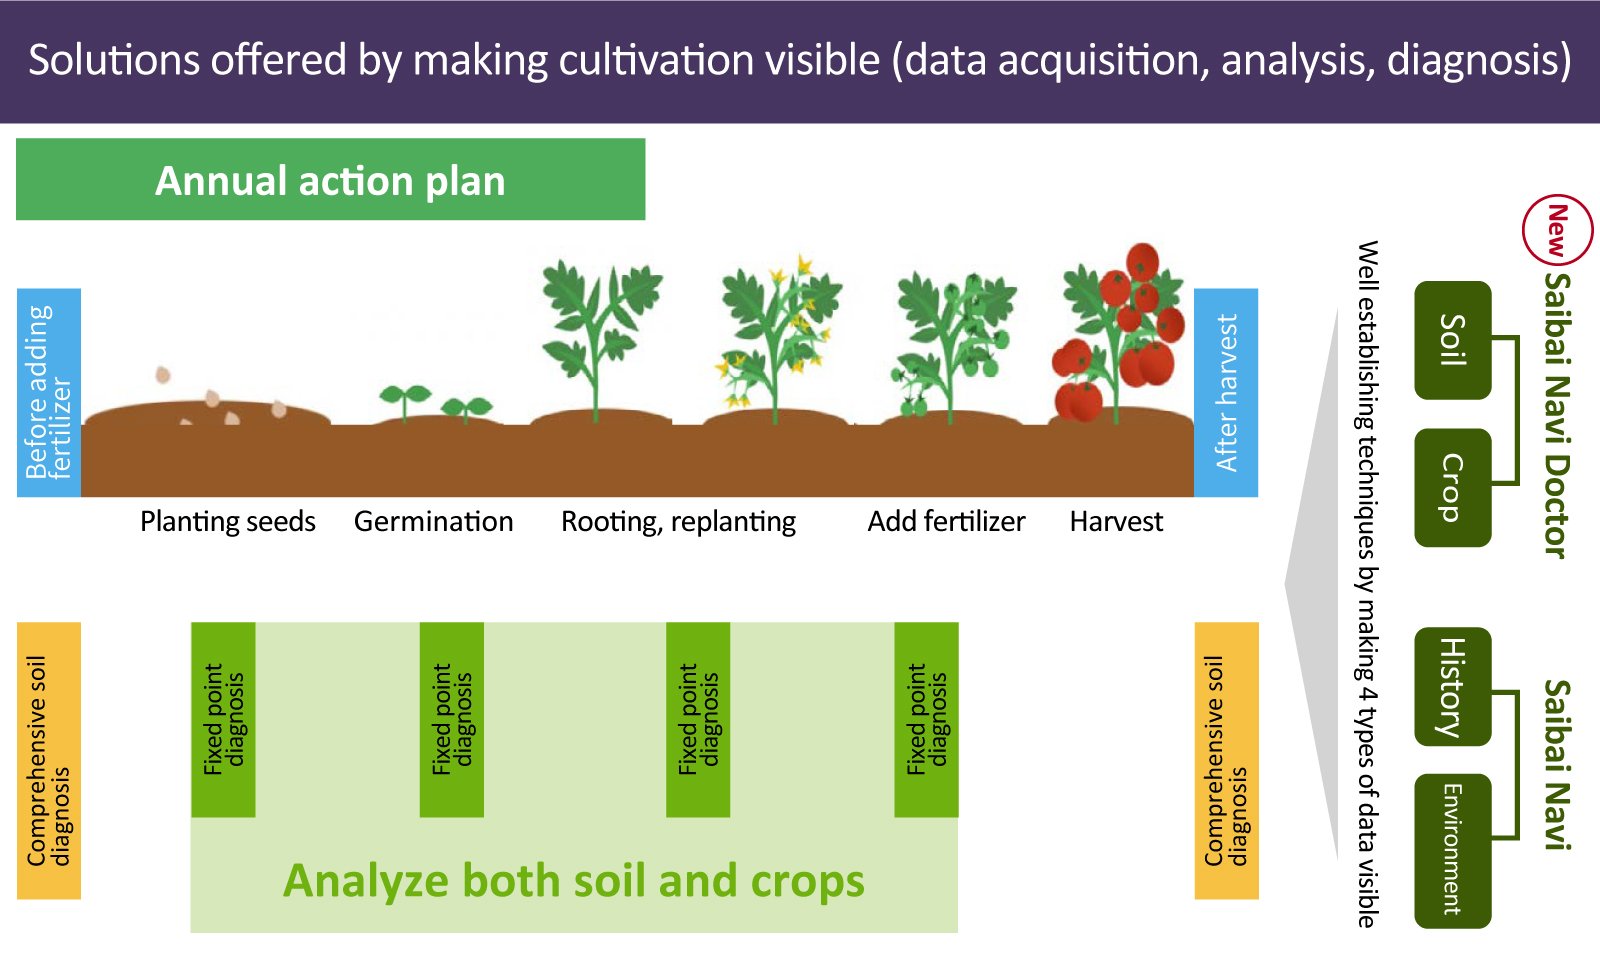 Solutions offered by making cultivation visible (data acquisition, analysis, diagnosis)